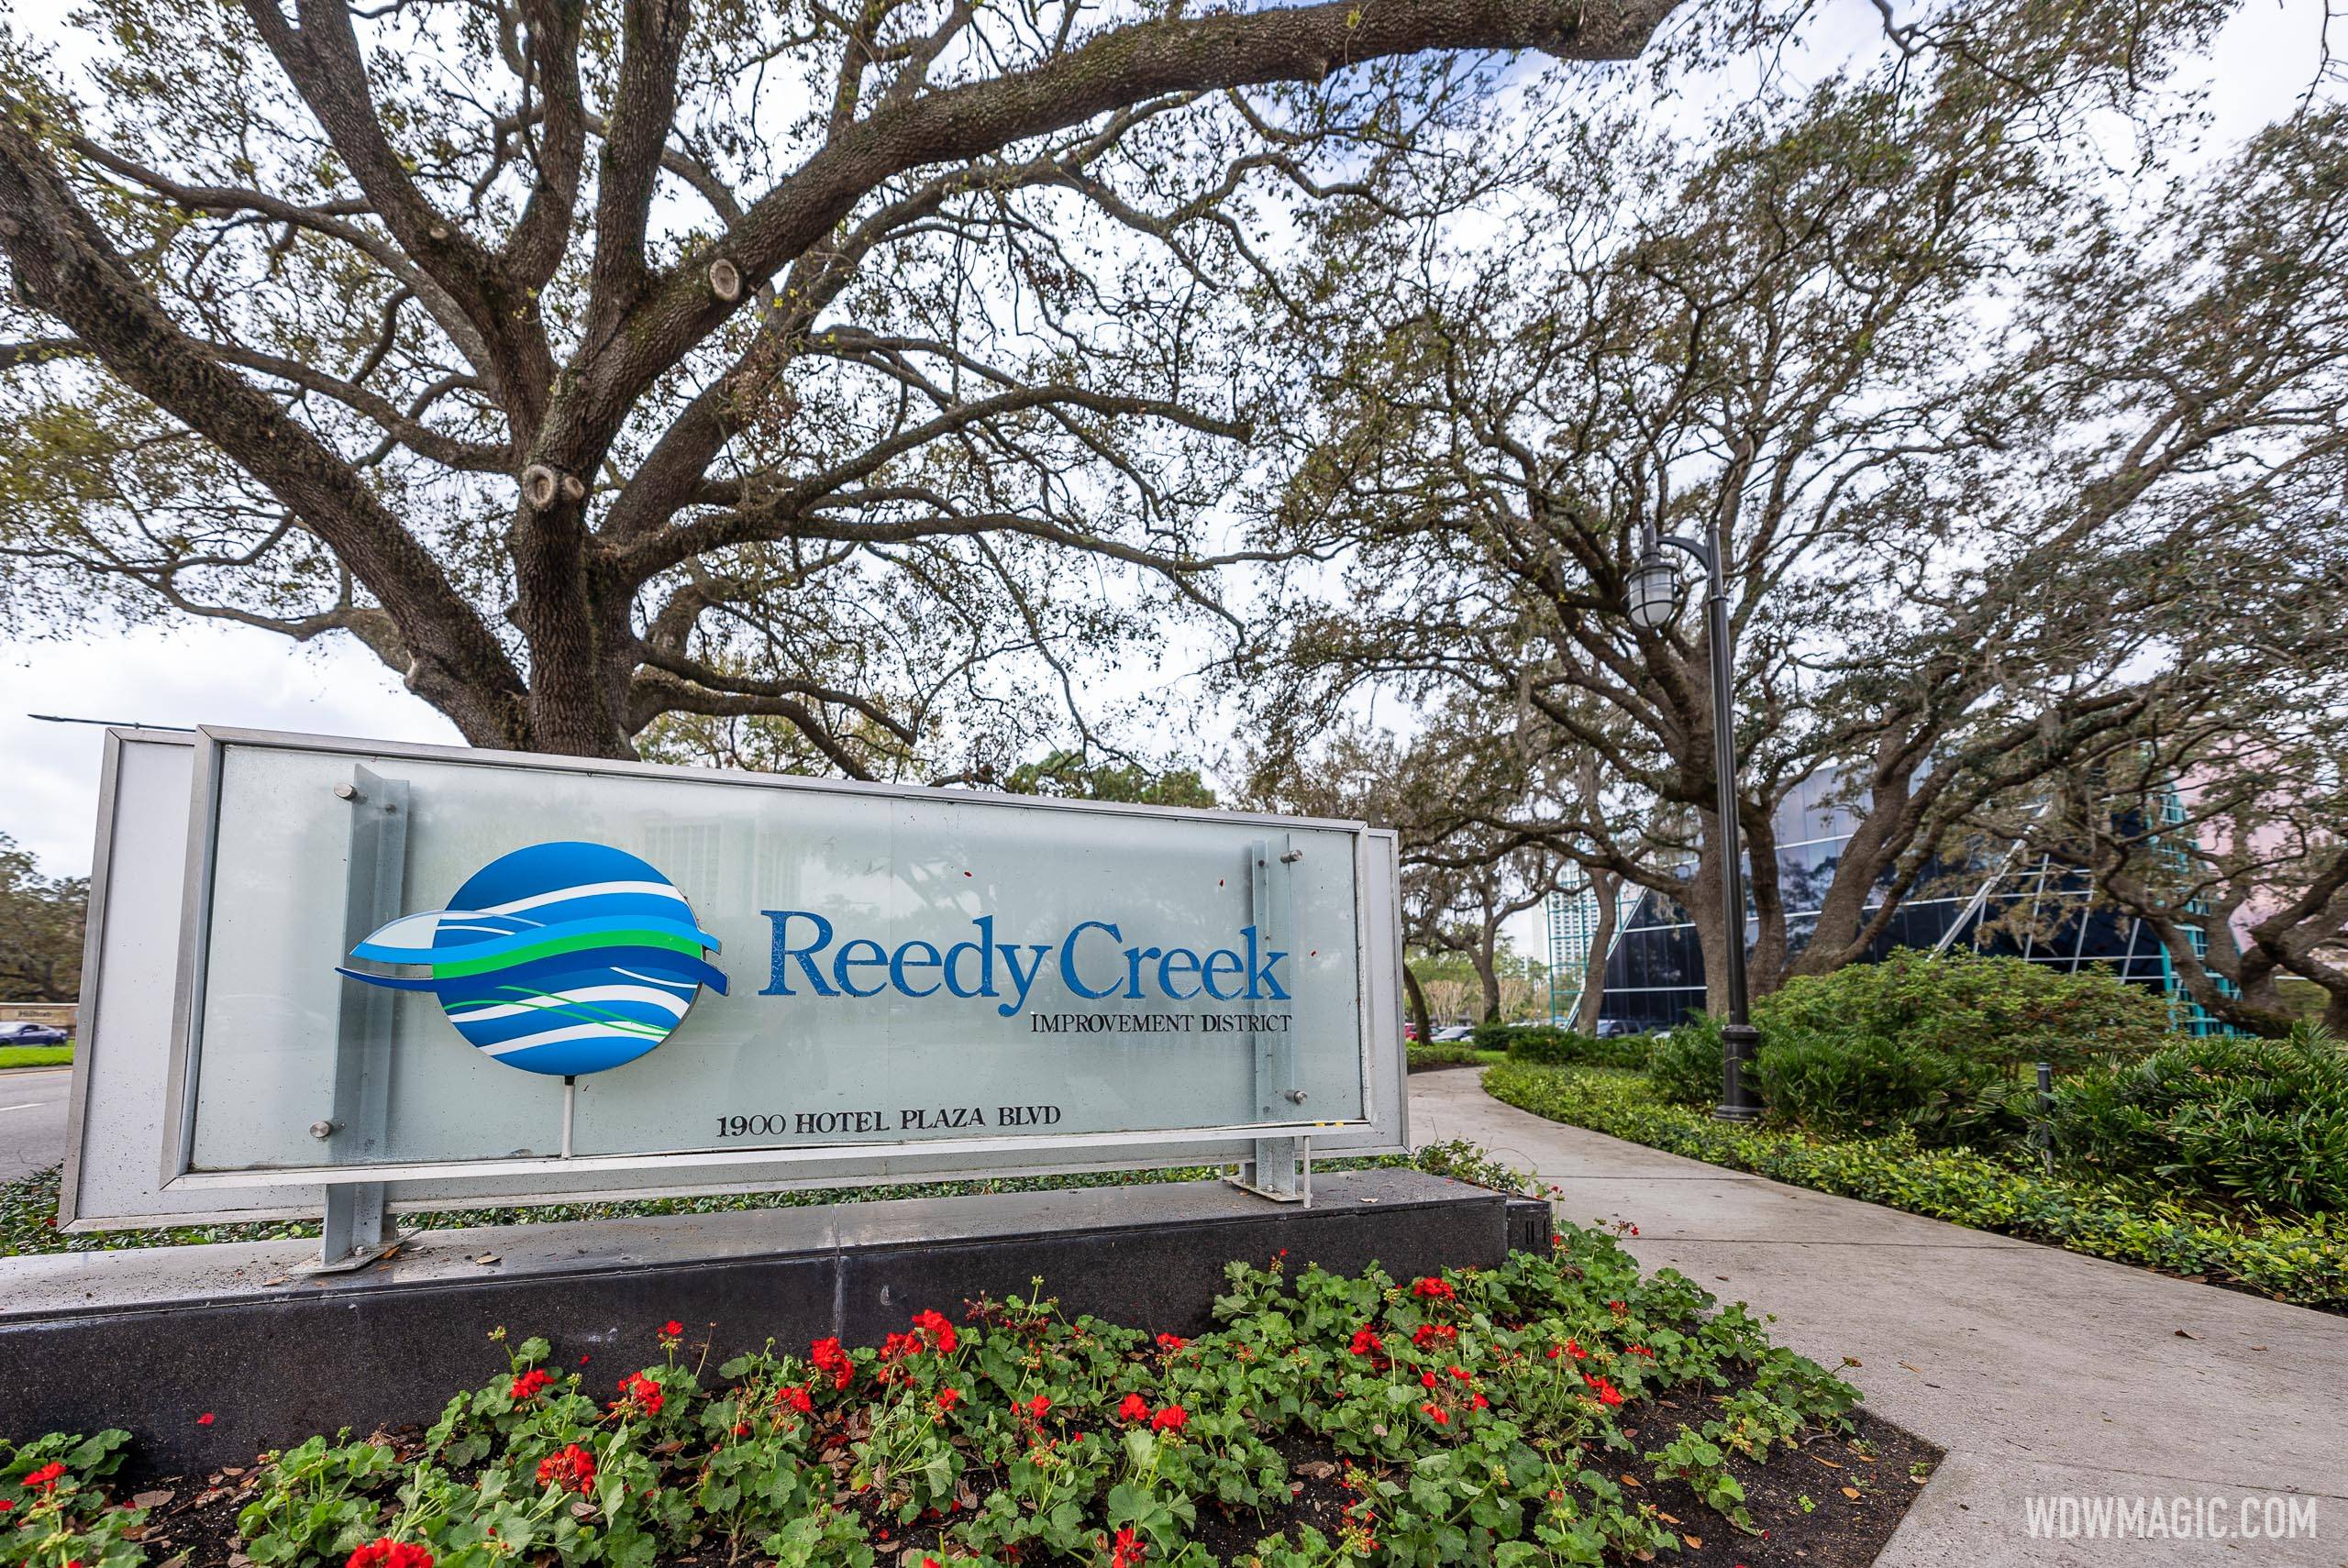 CFTOD says Reedy Creek was a Pandora's box, a curse disguised in the form of a beautiful gift